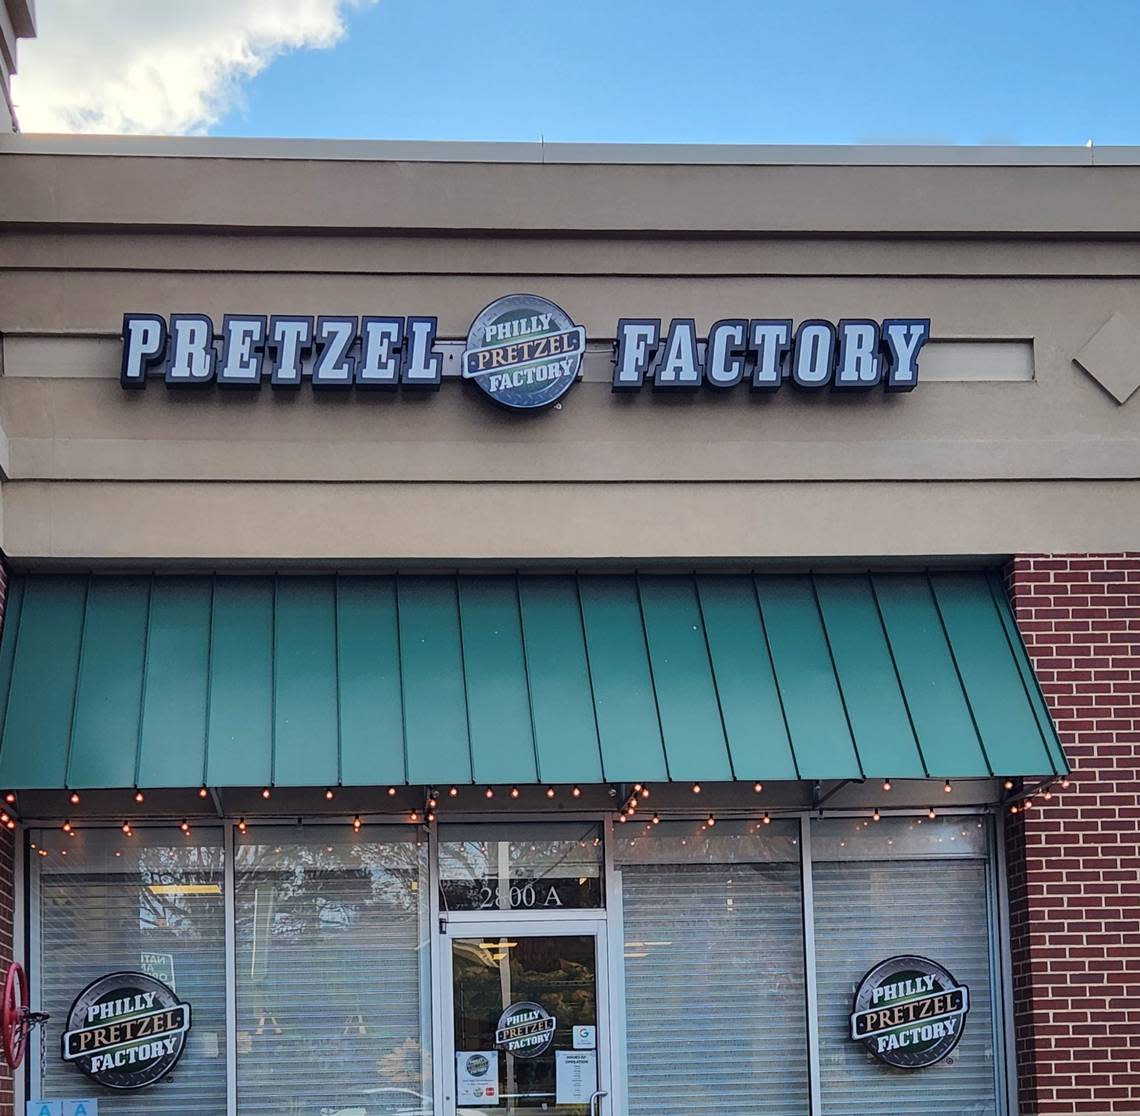 The Philly Pretzel Factory on Rosewood Drive said on Facebook that it plans to close by the end of 2022.